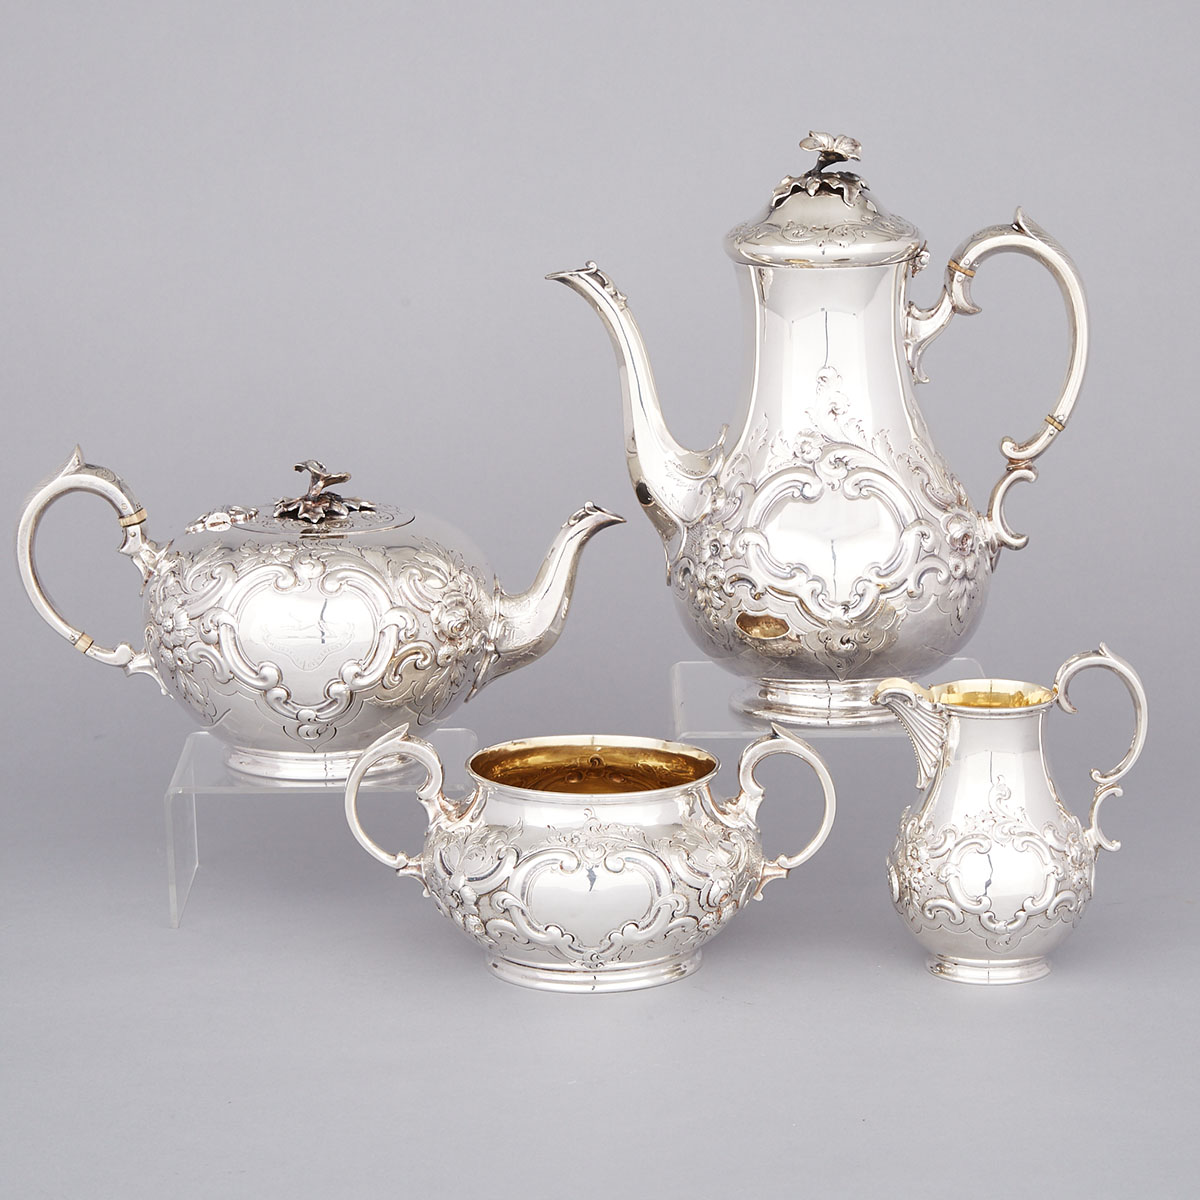 Assembled Victorian Silver Tea and Coffee Service, London, 1864-72